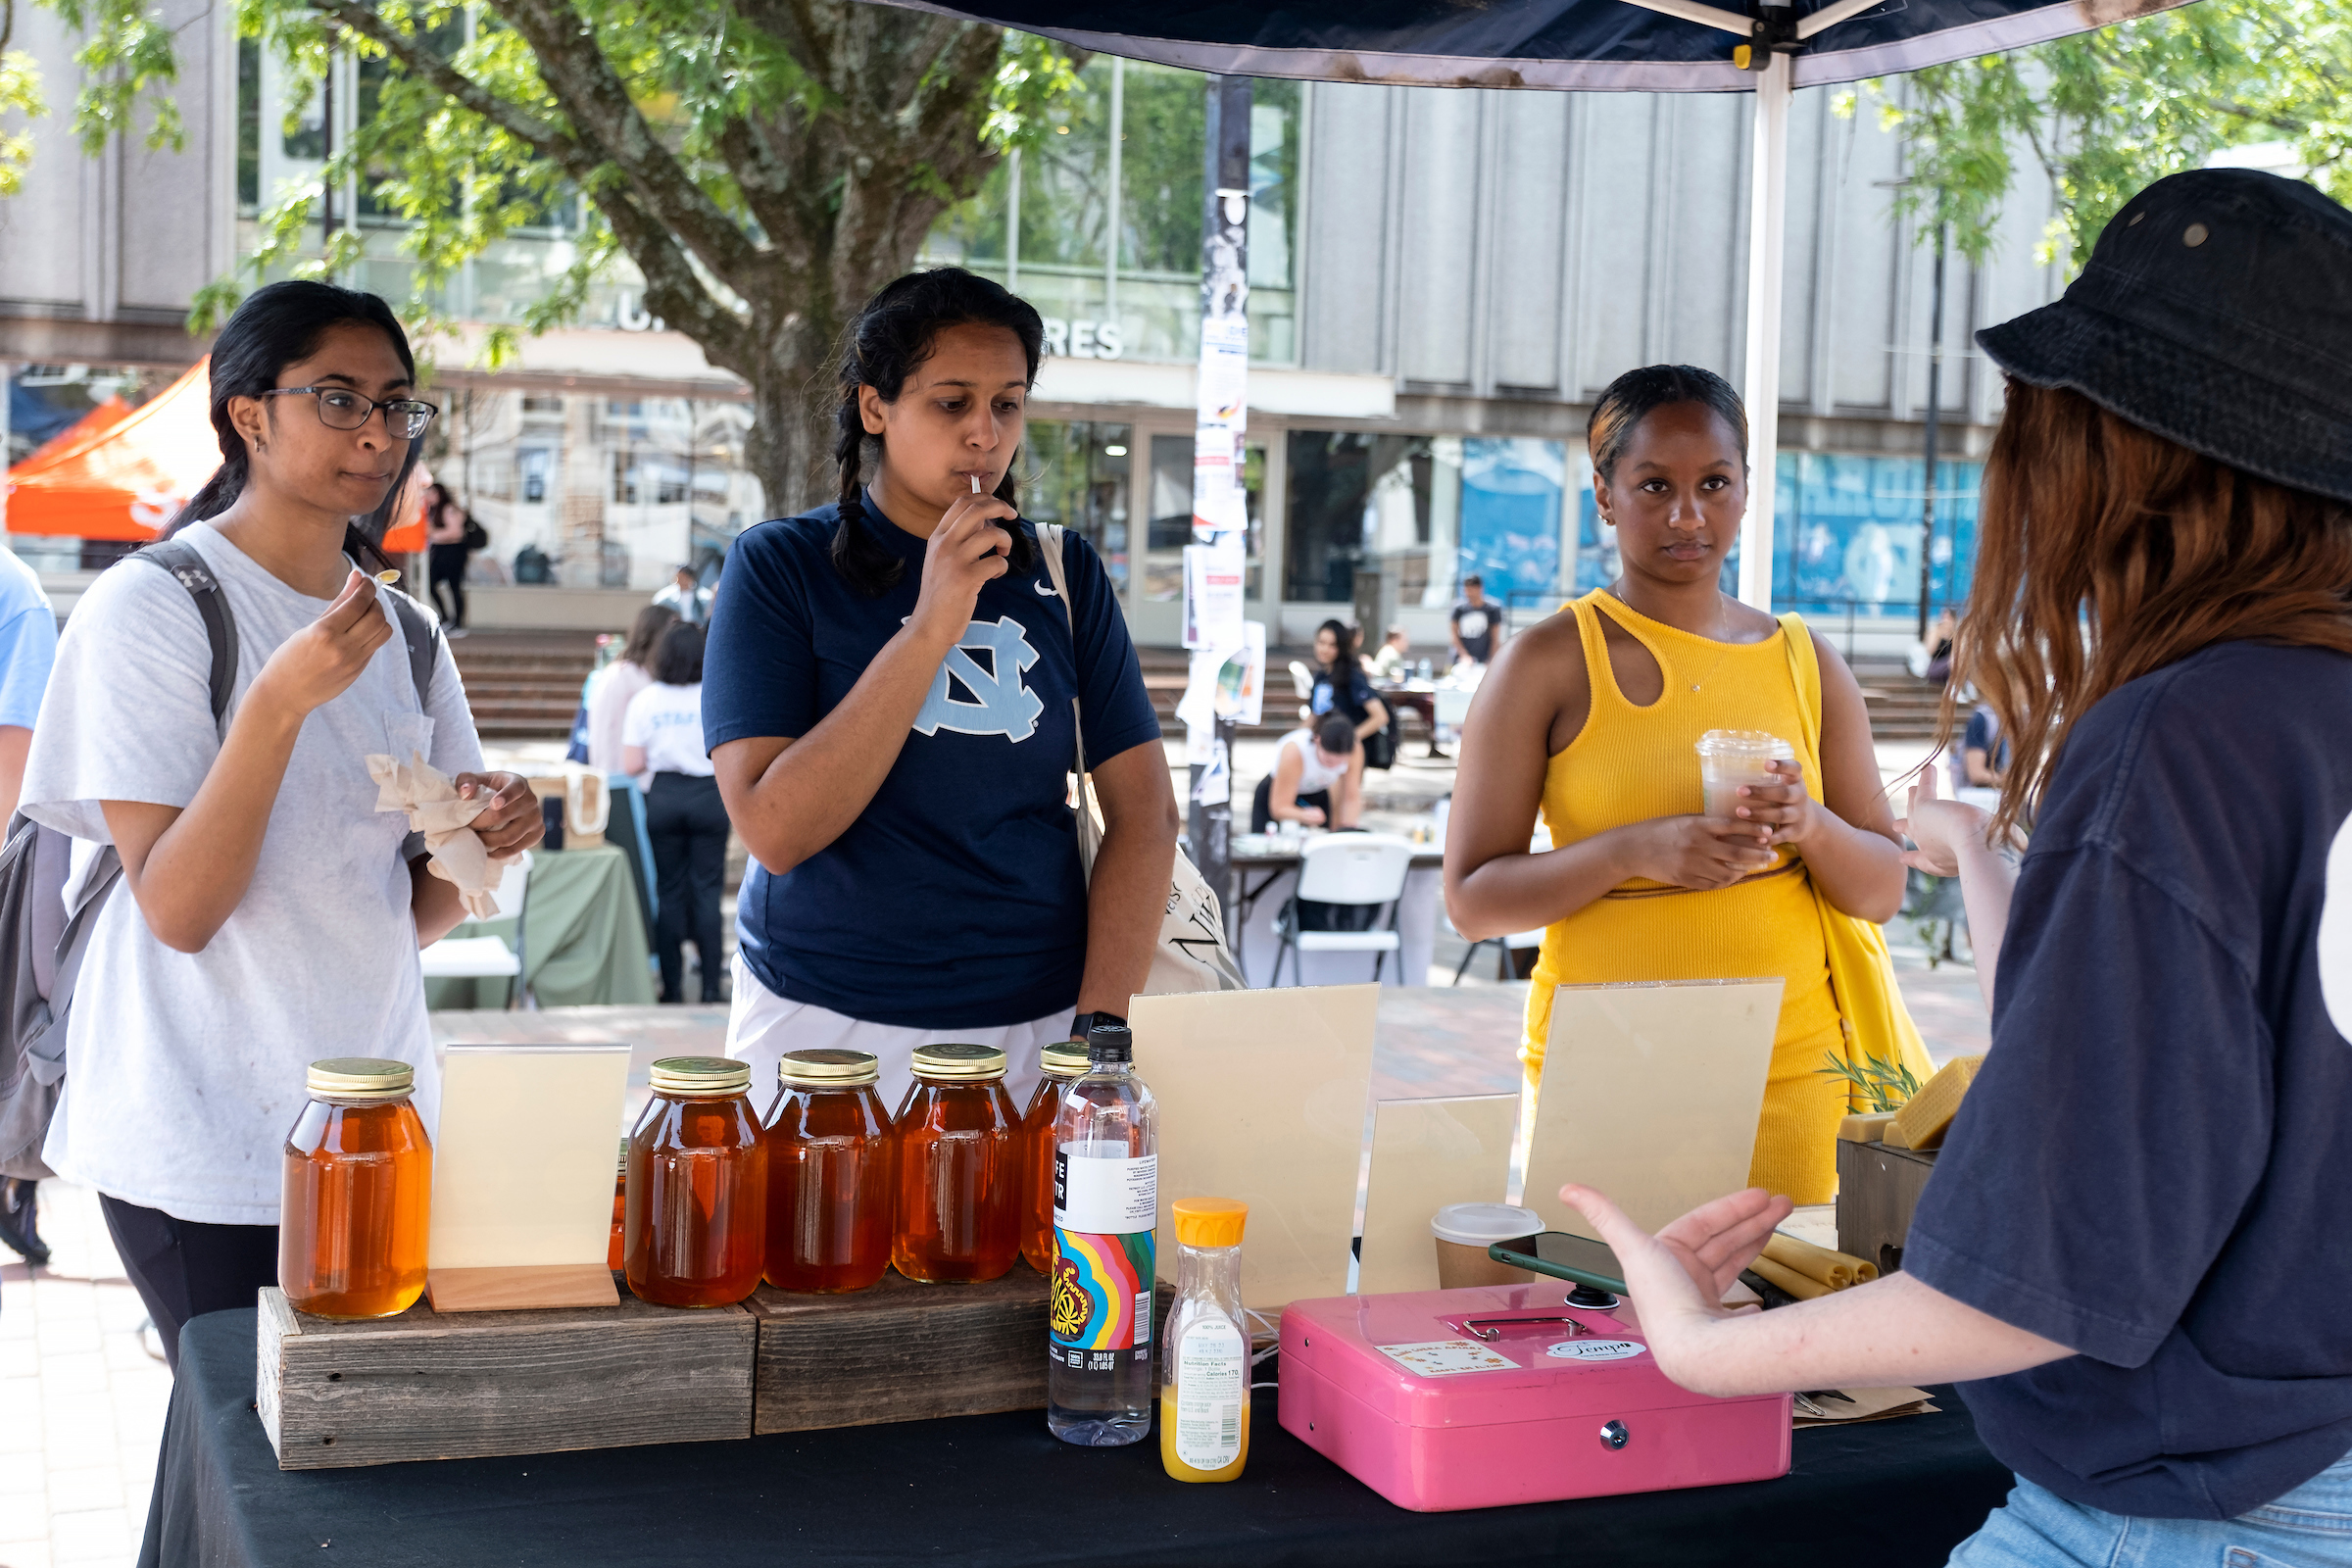 Students sample honey from King Cobra Apiary during a farmers market in the Pit. (Jon Gardiner/UNC-Chapel Hill)